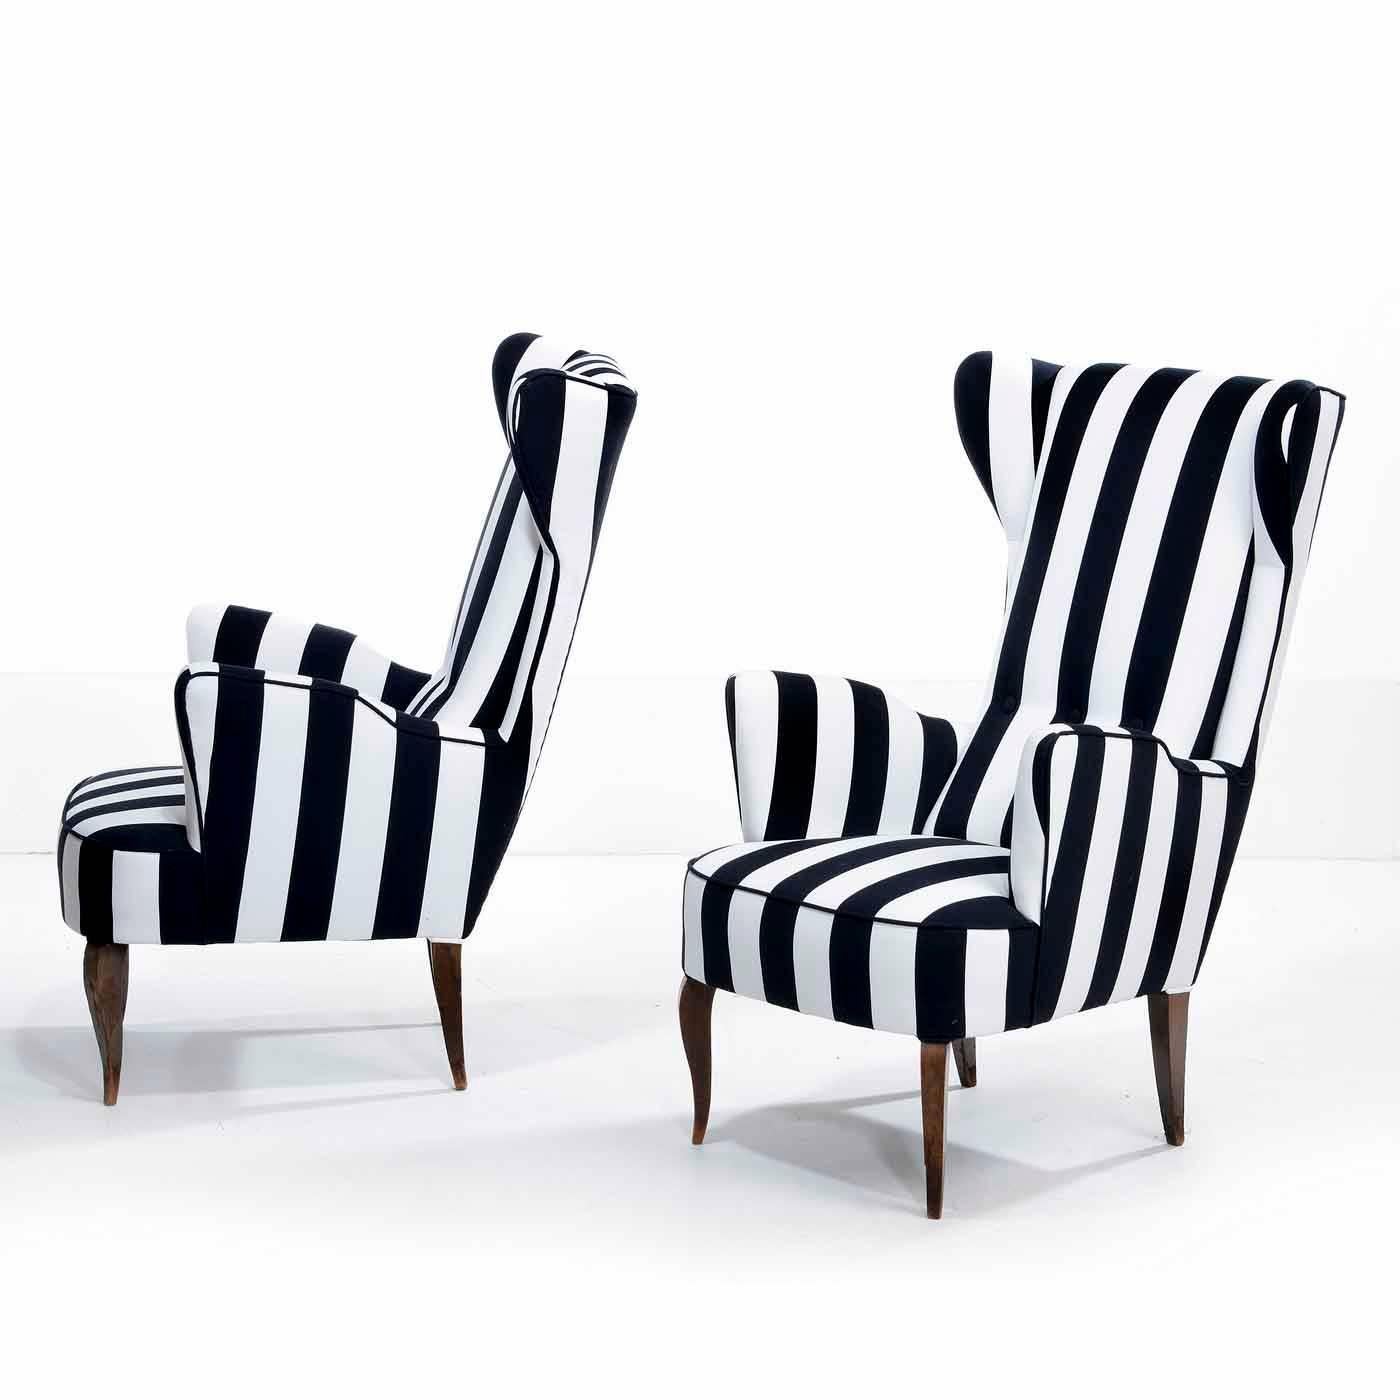 Pair of Italian club chairs with polished cabriolet legs. Reupholstered in striped cotton.